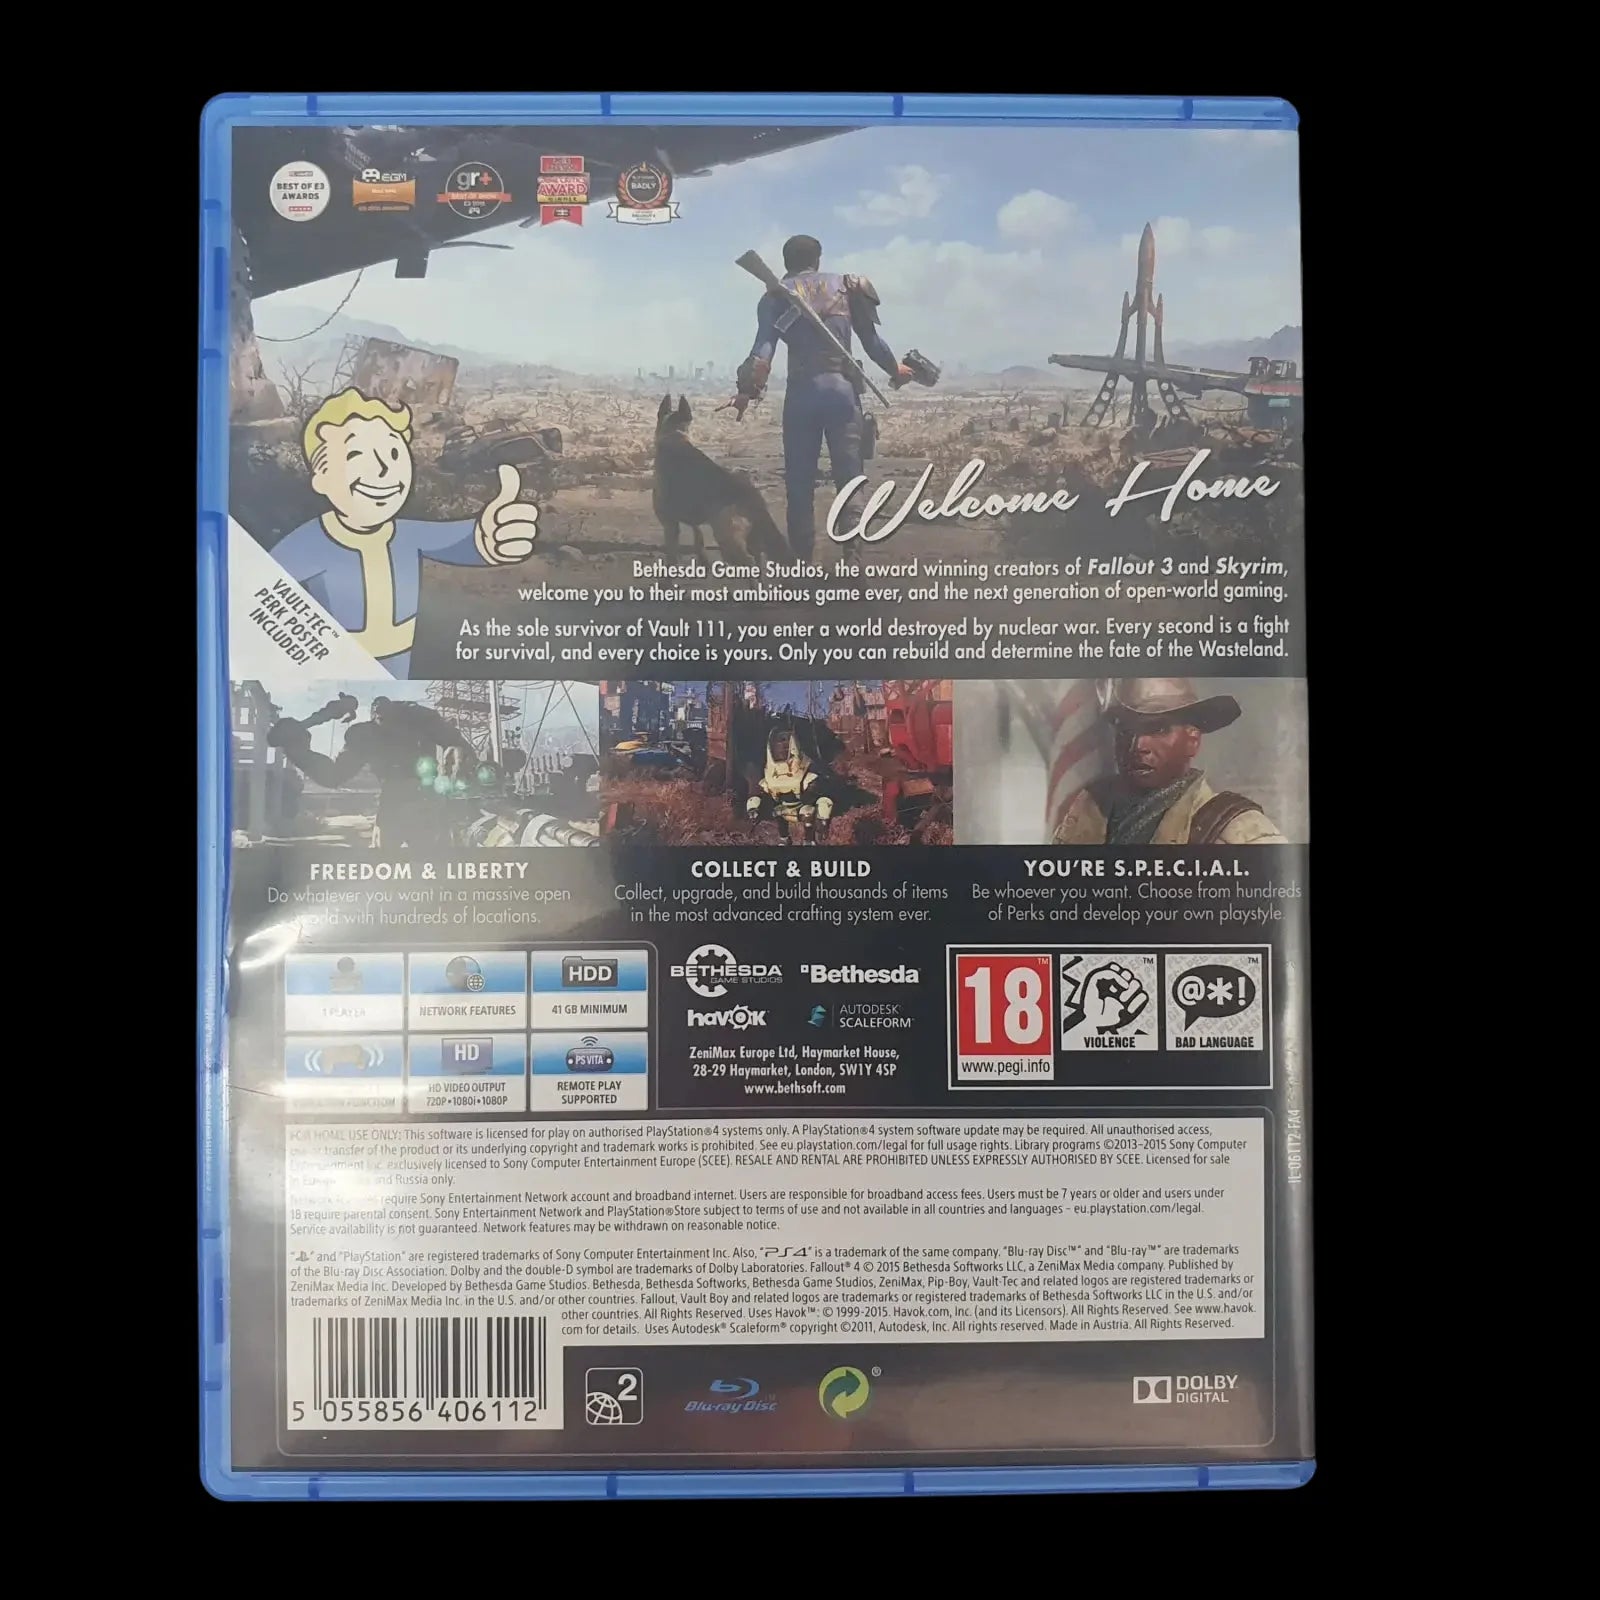 Fallout 4 Sony Playstation Ps4 Bethesda 2015 Cib Video Game